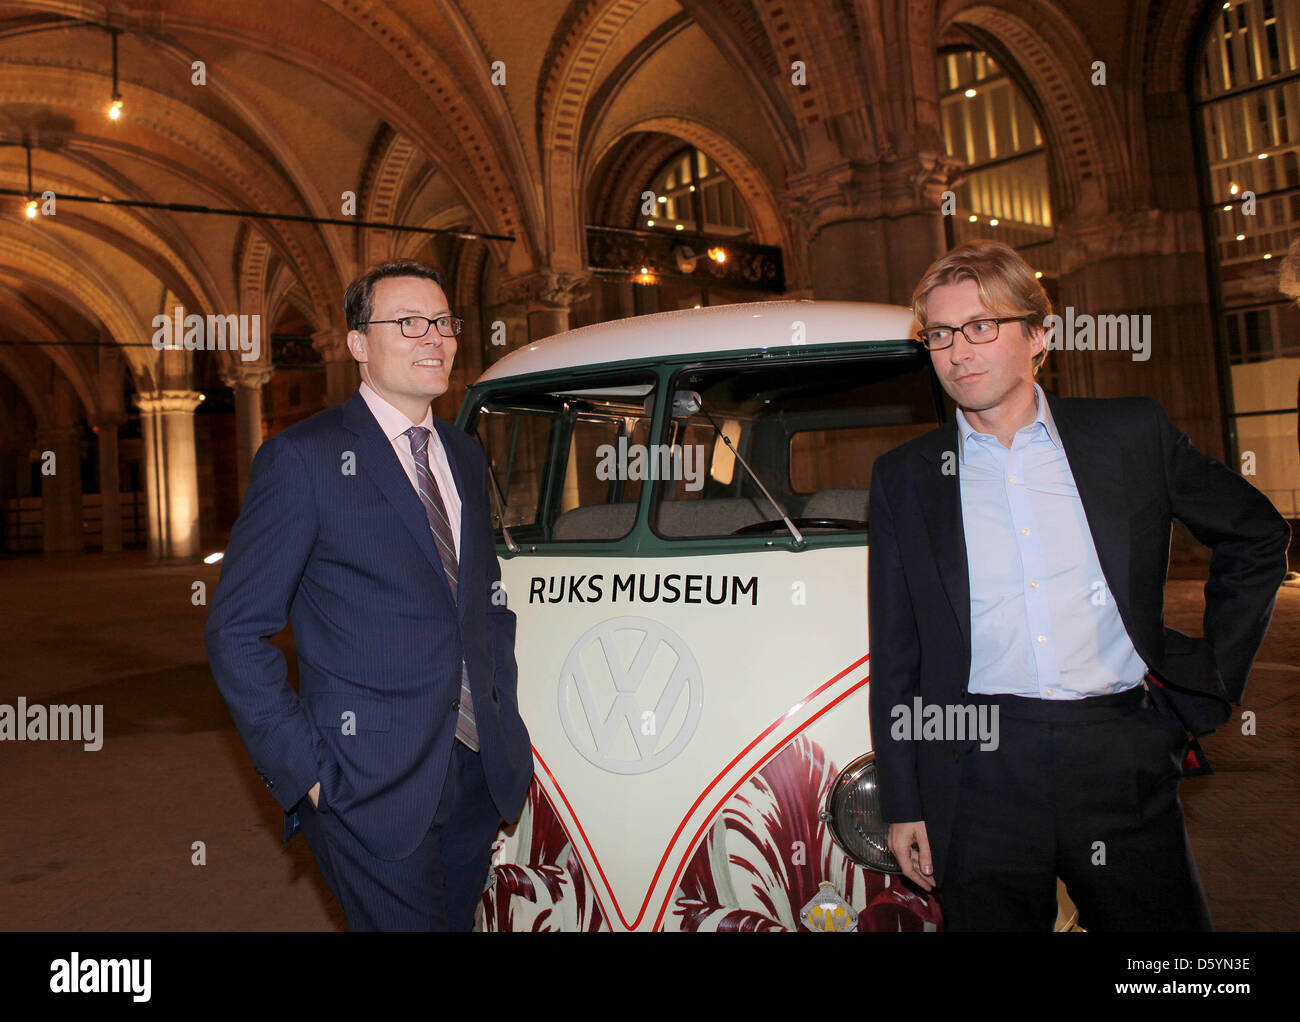 Prince Constantijn of the Netherlands and Taco Dibbits, Director of Collections at the Rijksmuseum, open the digital archive of the Rijksmuseum in Amsterdam, The Netherlands, 30 October 2012. The Rijksmuseum has lanched the 'Rijks Studio', a digital on-line archive with 125.000 objects of the collection. Photo: RPE-Albert Nieboer / NETHERLANDS OUT Stock Photo